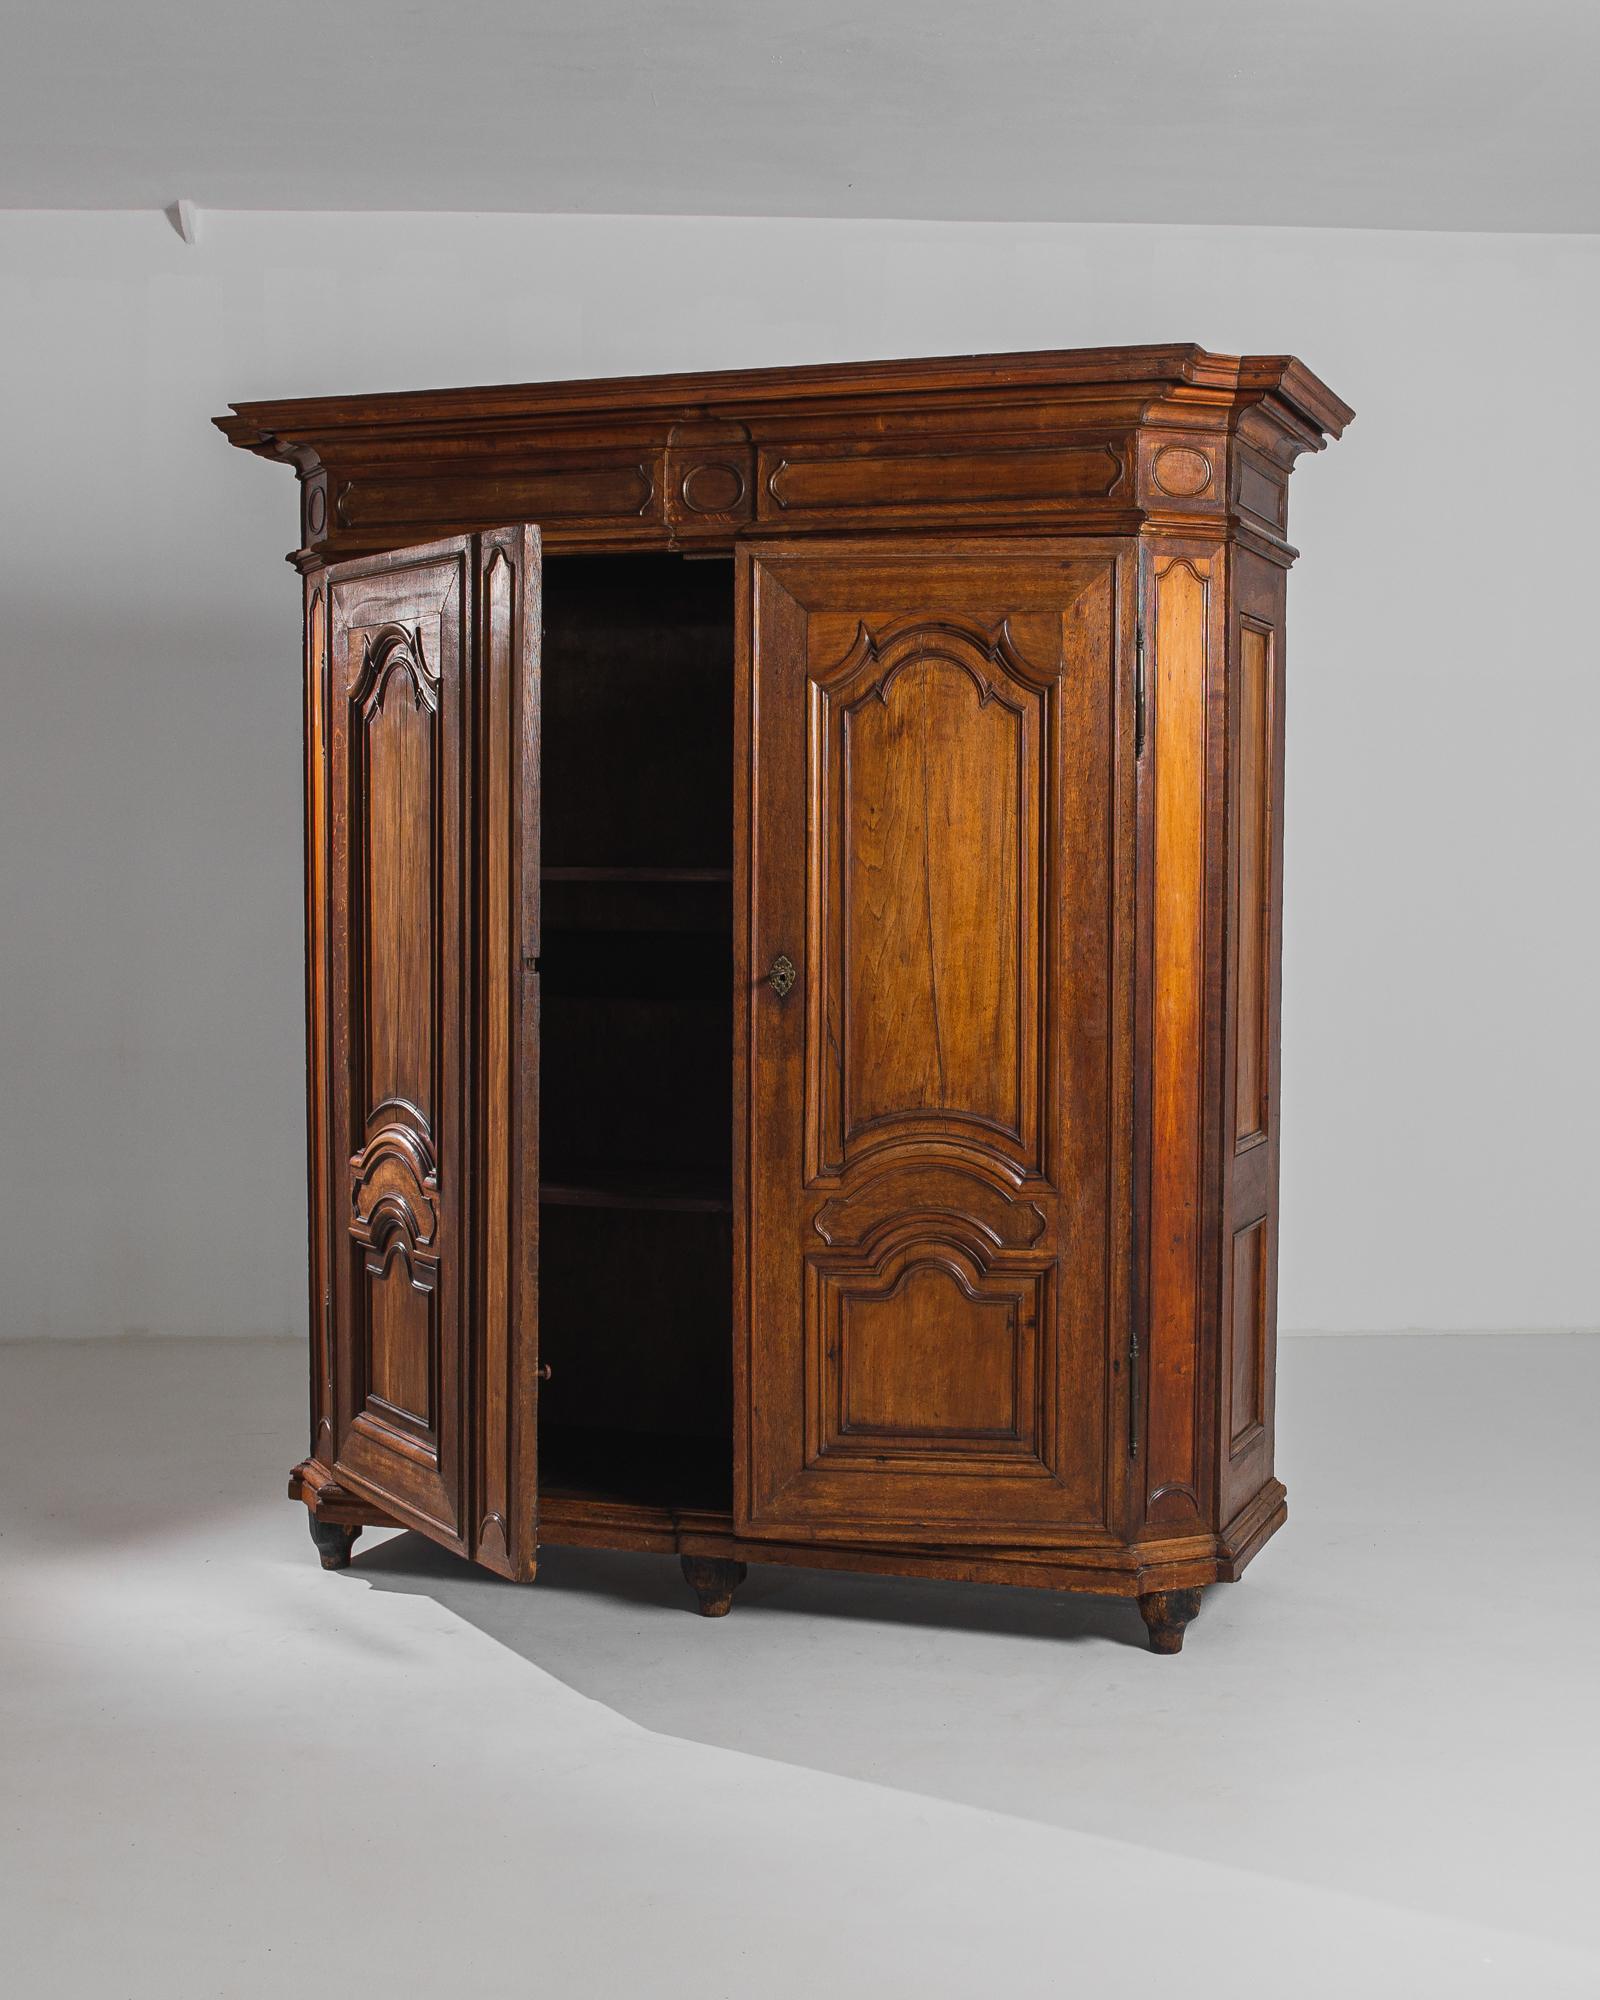 From the distinguished halls of 19th-century Europe emerges this exquisite wooden armoire, adorned with its original patina that speaks volumes of its rich history and enduring elegance. Crafted with precision and artistry, this armoire stands as a